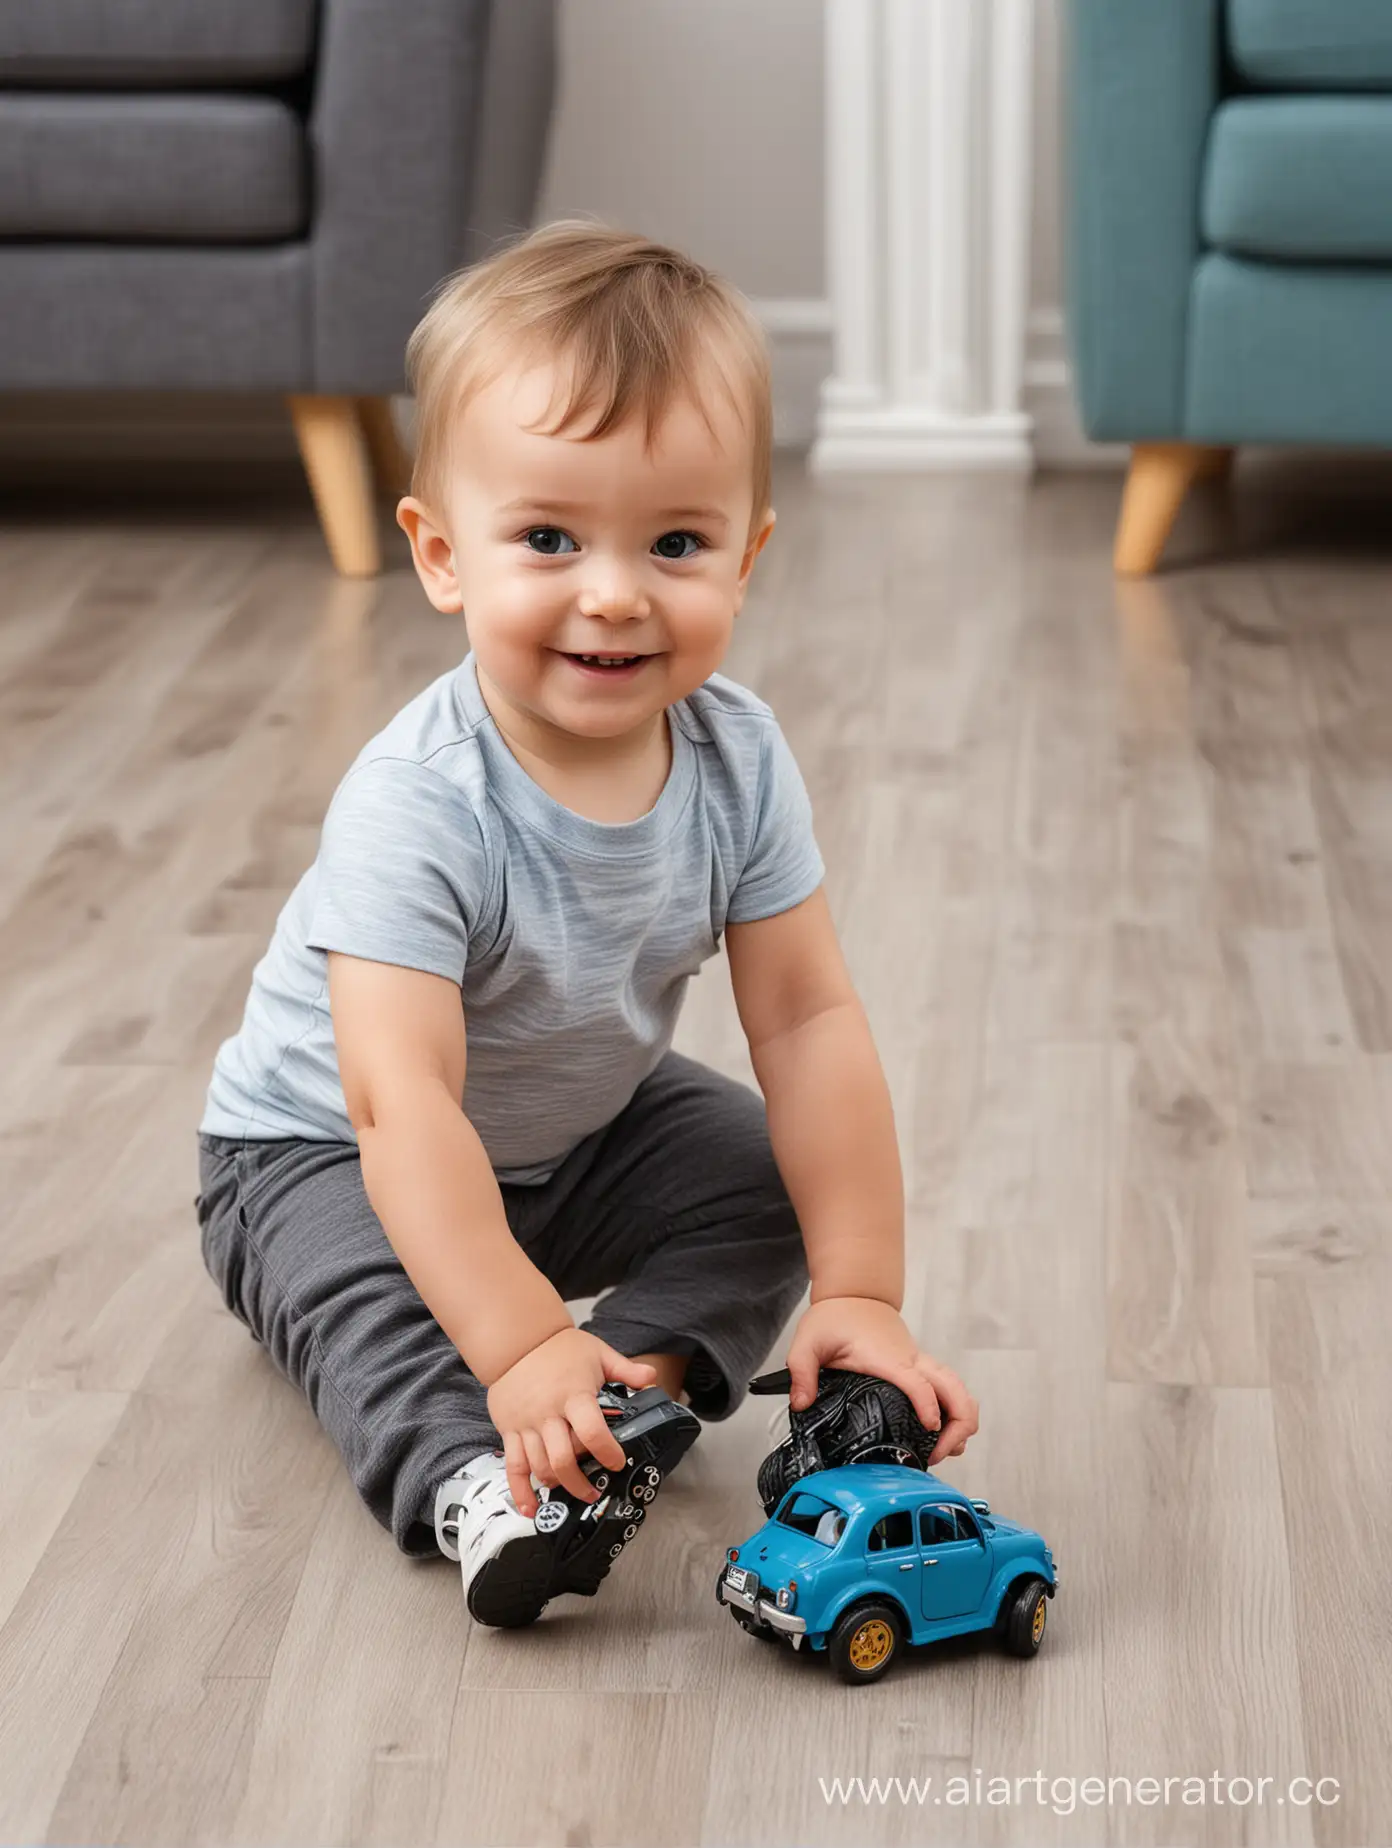 Joyful-Child-Engaged-in-Play-with-Toy-Cars-on-Home-Carpet